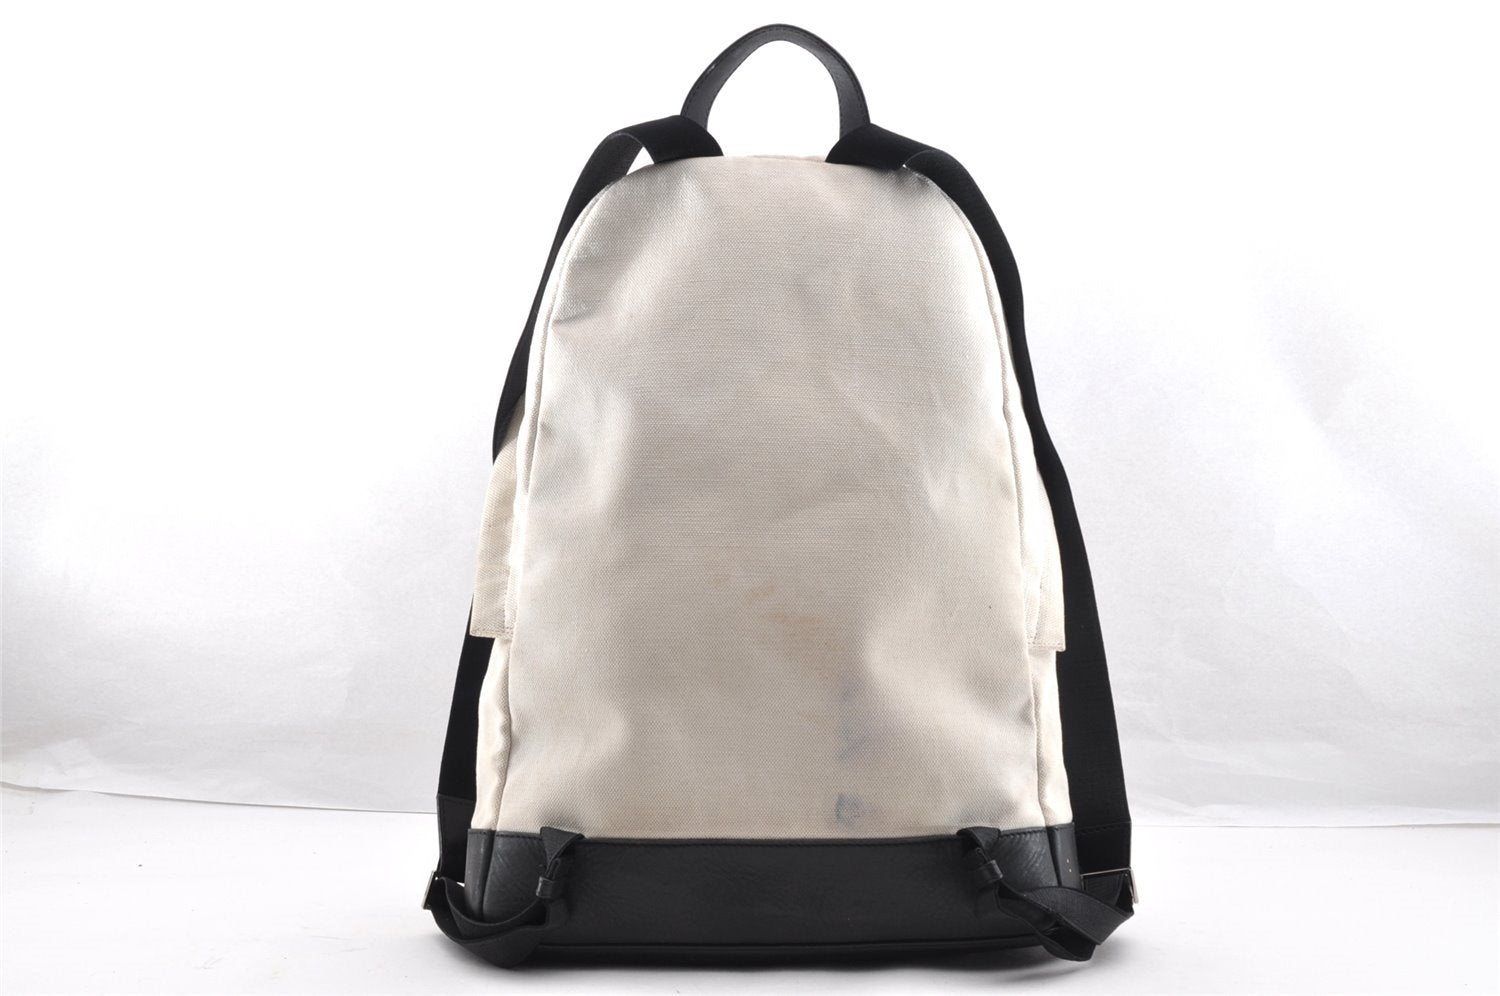 Authentic BALENCIAGA Navy Backpack Vintage Canvas Leather 392007 White 5735I